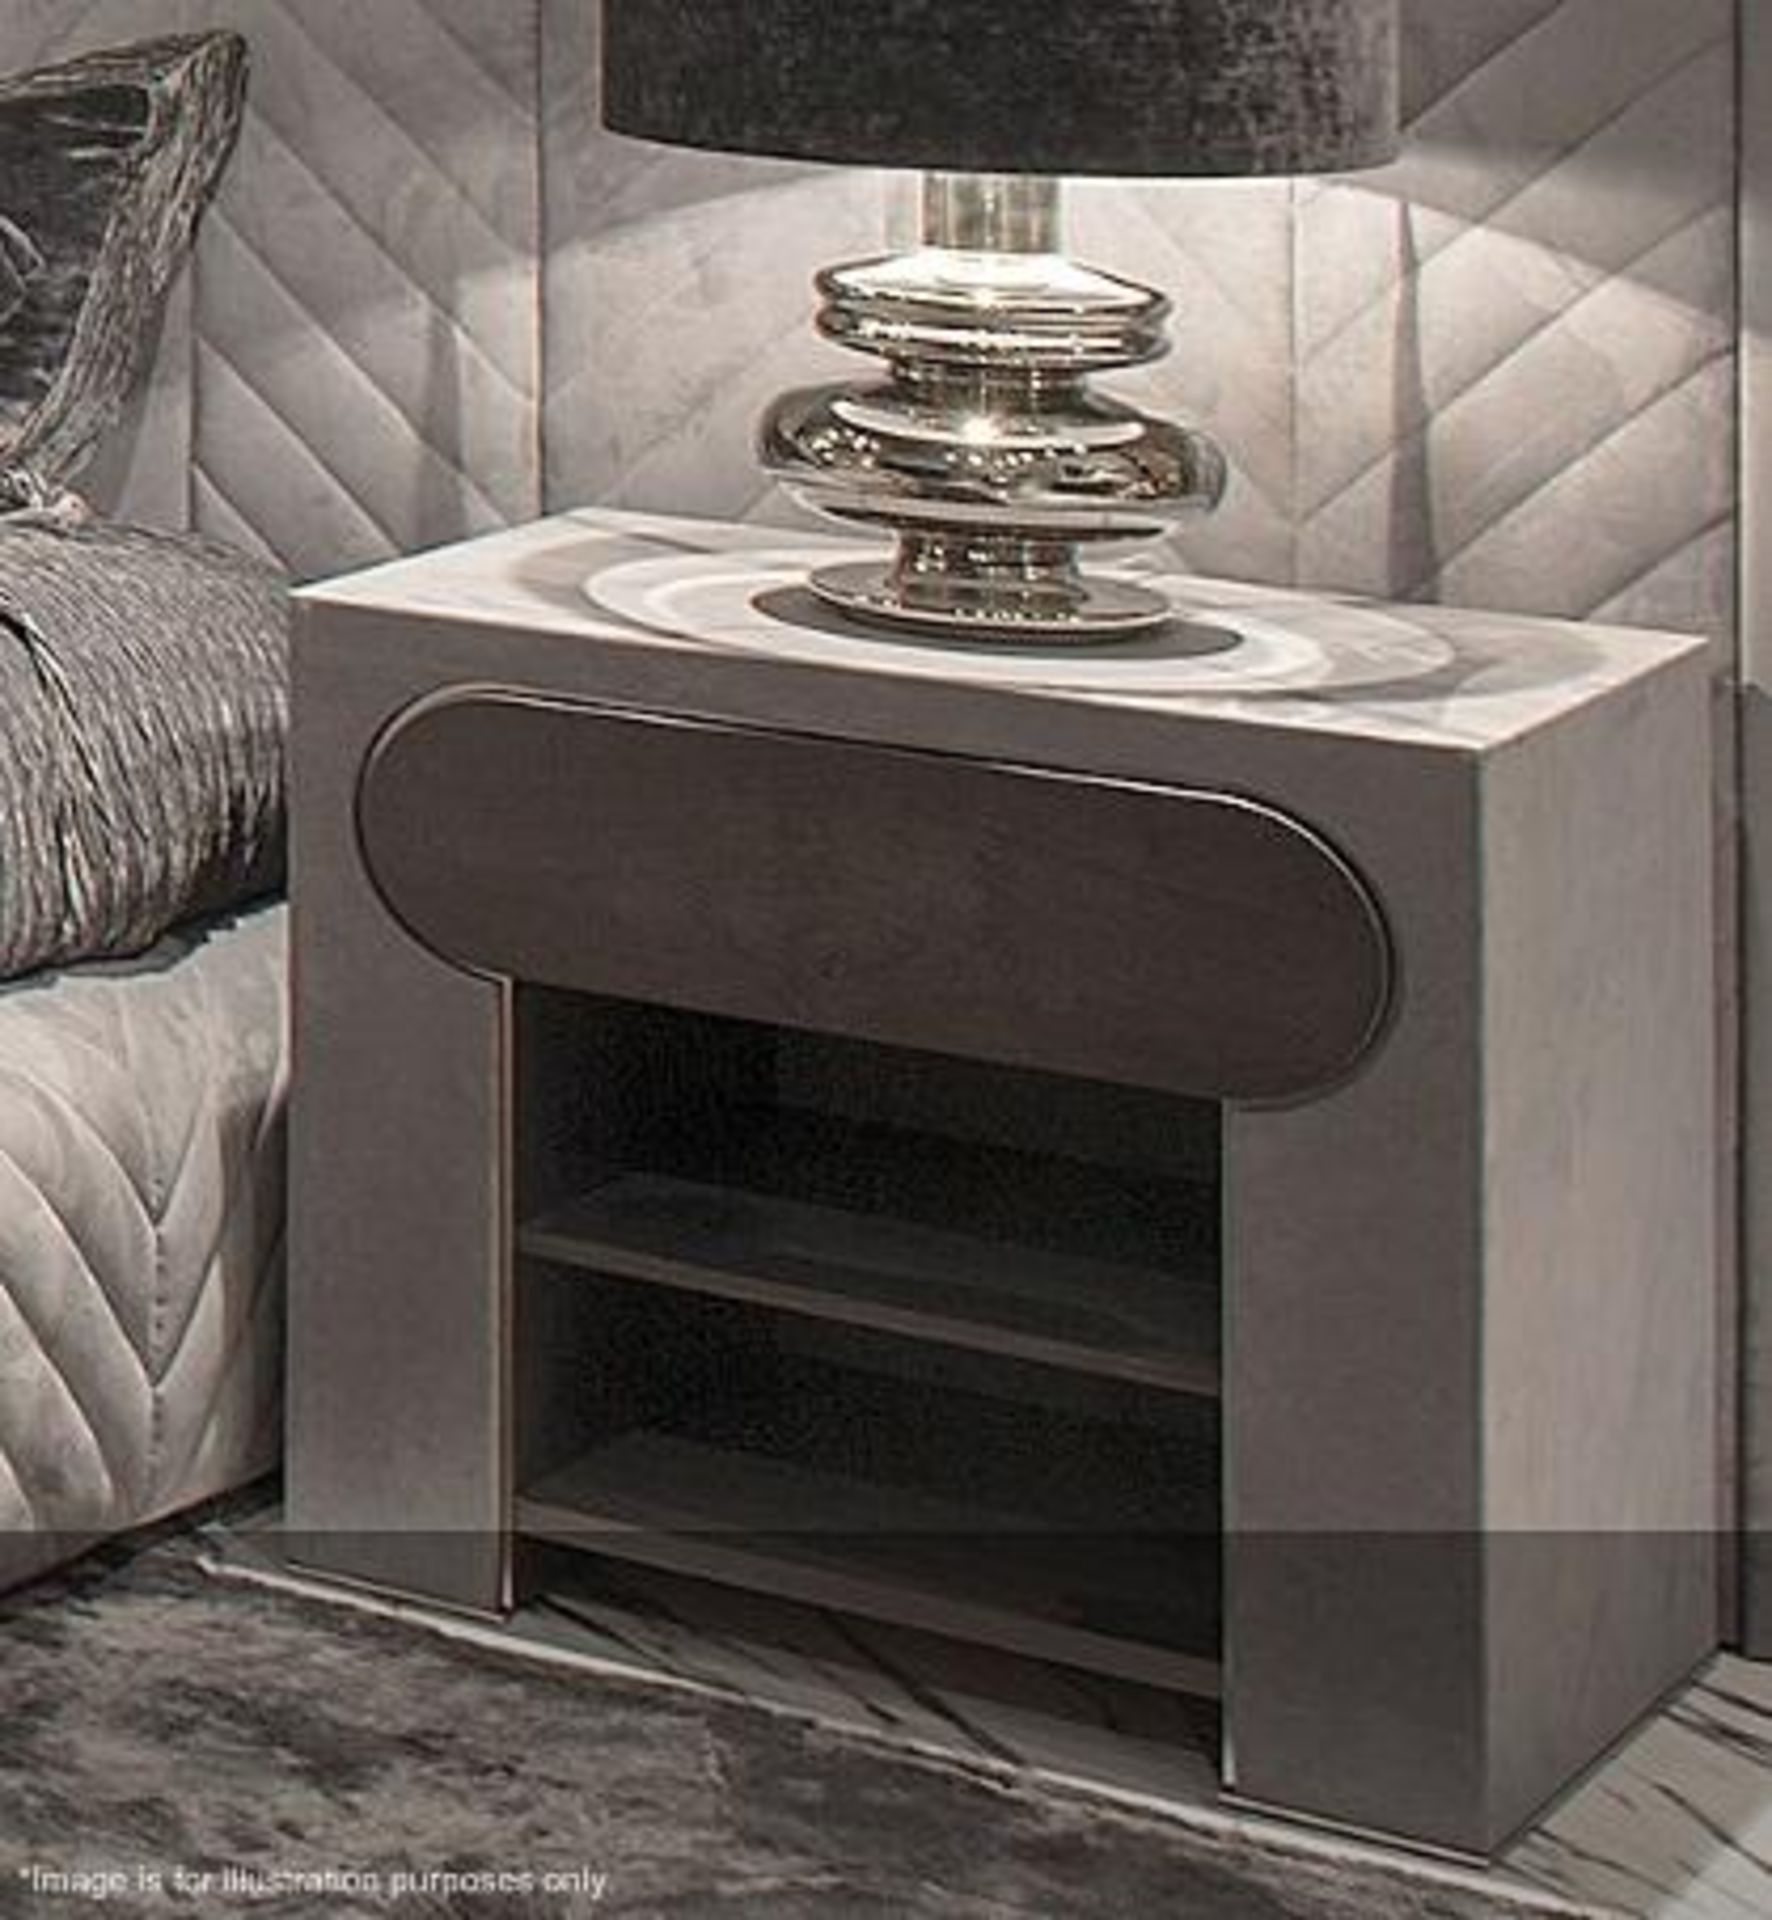 A Pair Of SMANIA 'Lock' Upholstered Nightstand Bedside Cabinets (Colock01) - Dimensions: W71 x H66 x